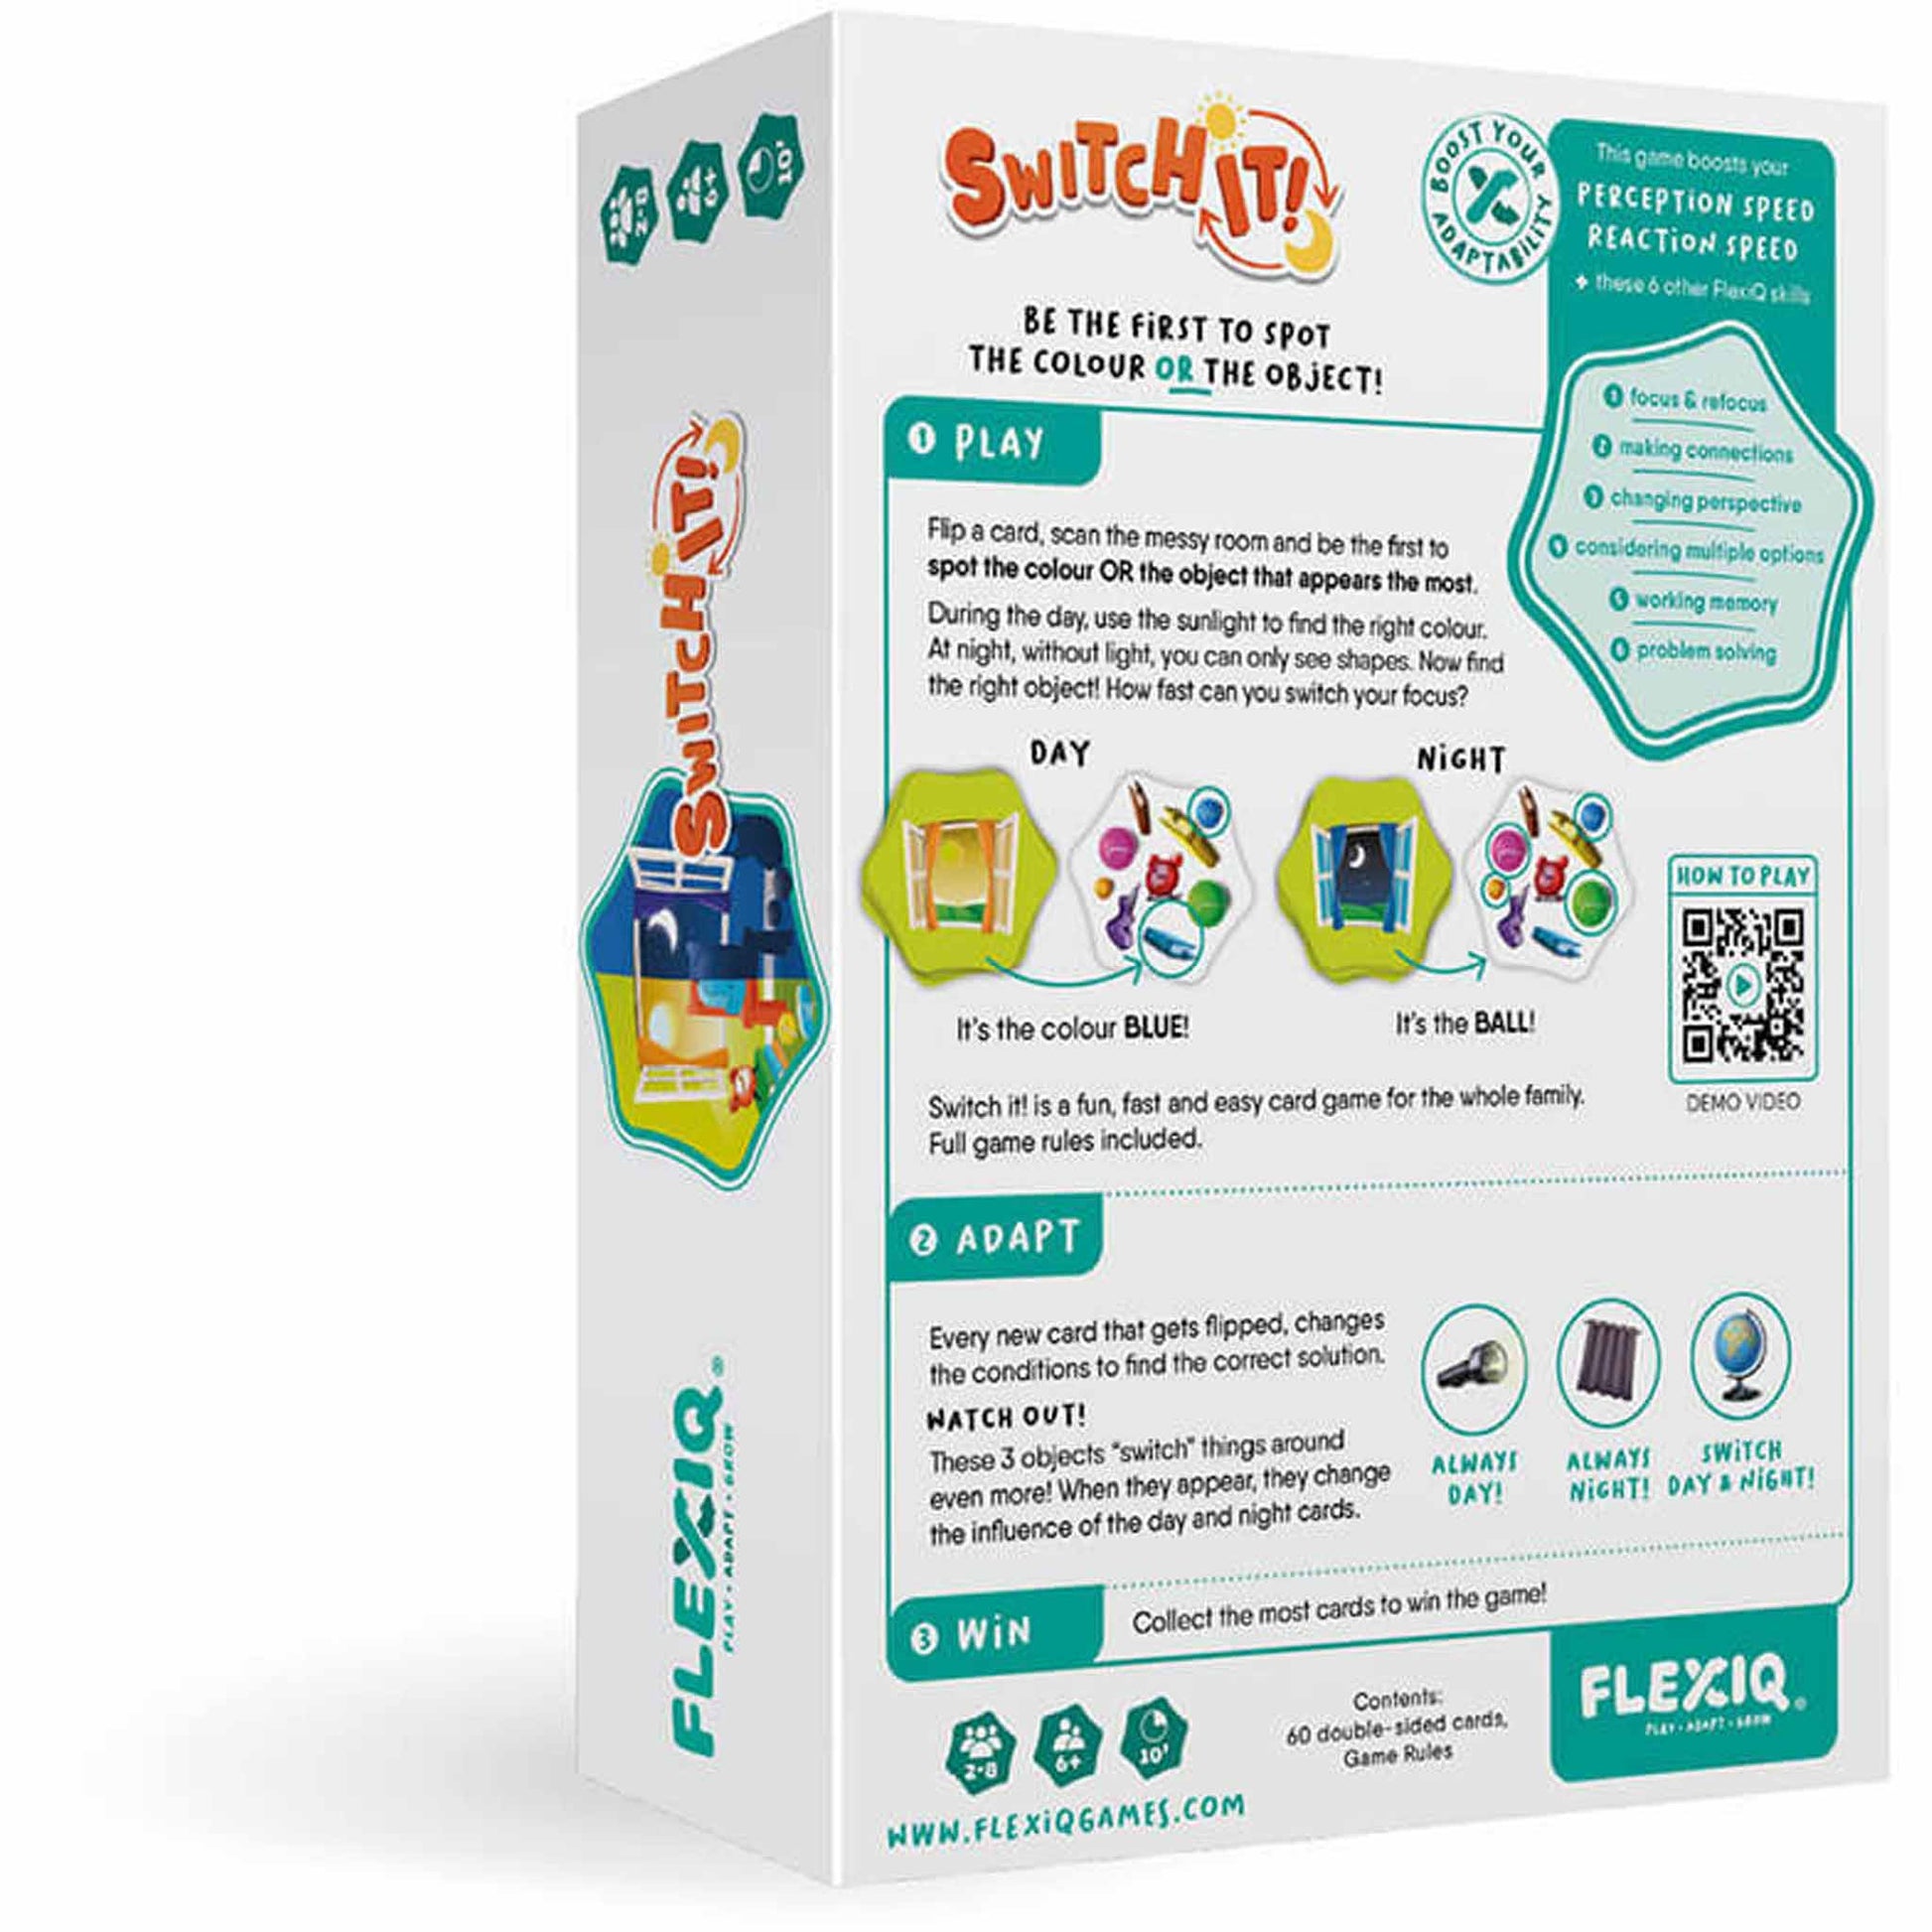 Photo of back of box of Switch It! flexible thinking game by FLEXIQ.